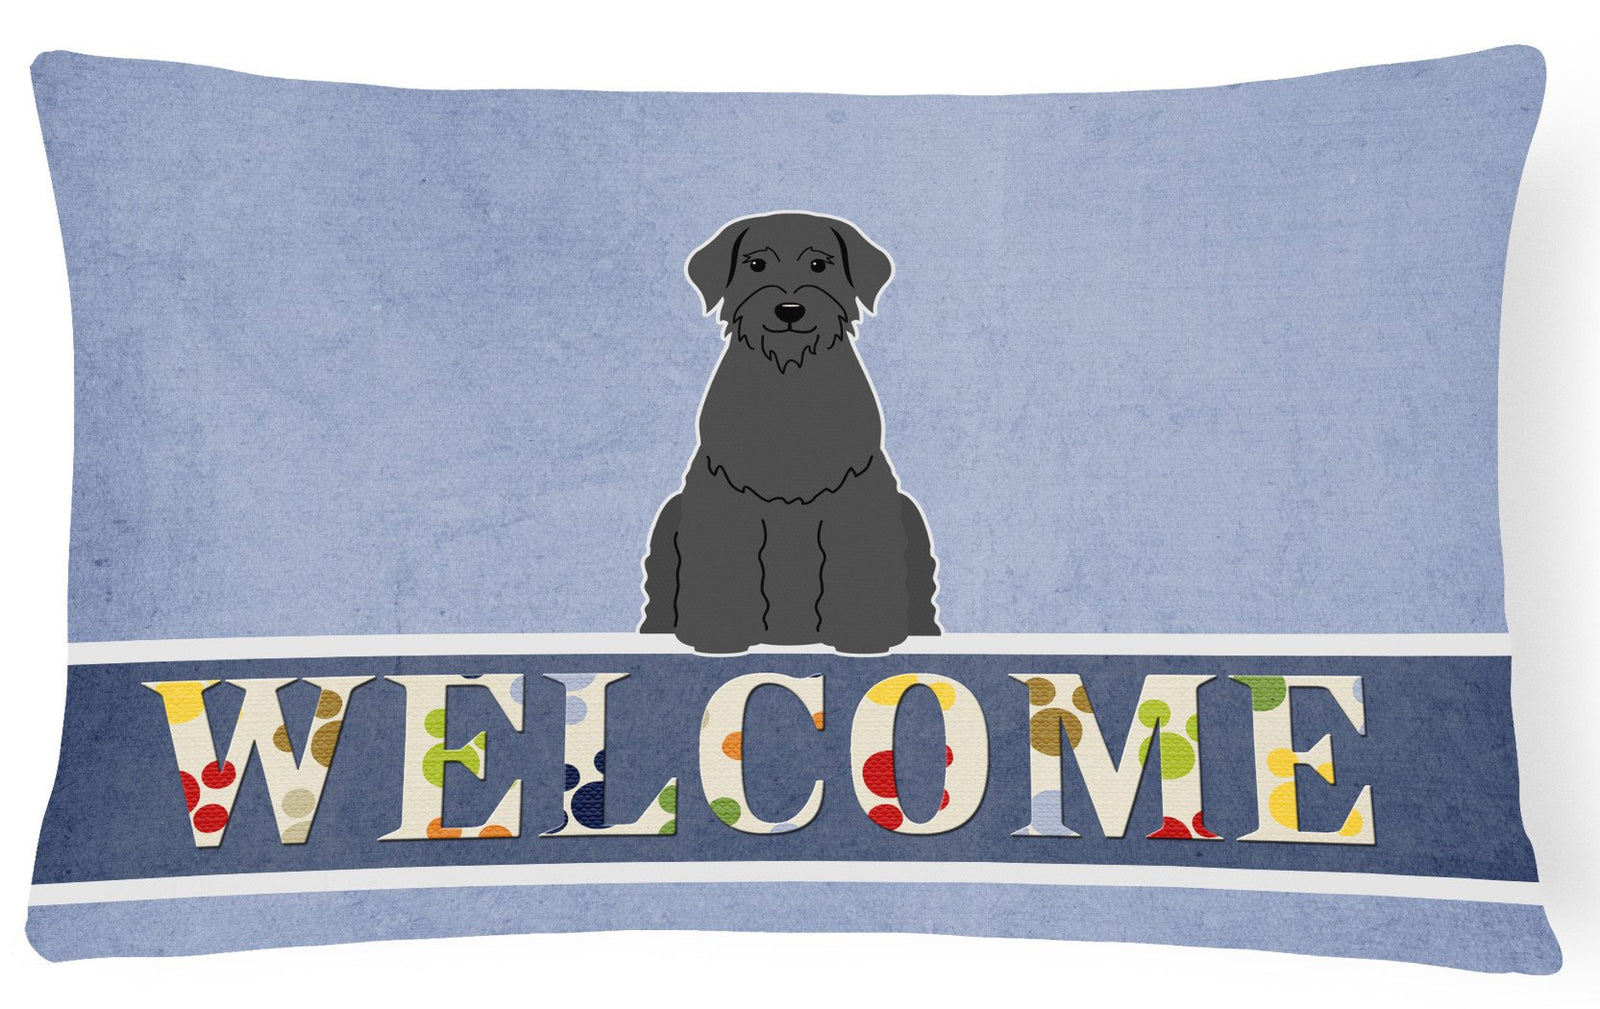 Giant Schnauzer Welcome Canvas Fabric Decorative Pillow BB5647PW1216 by Caroline's Treasures